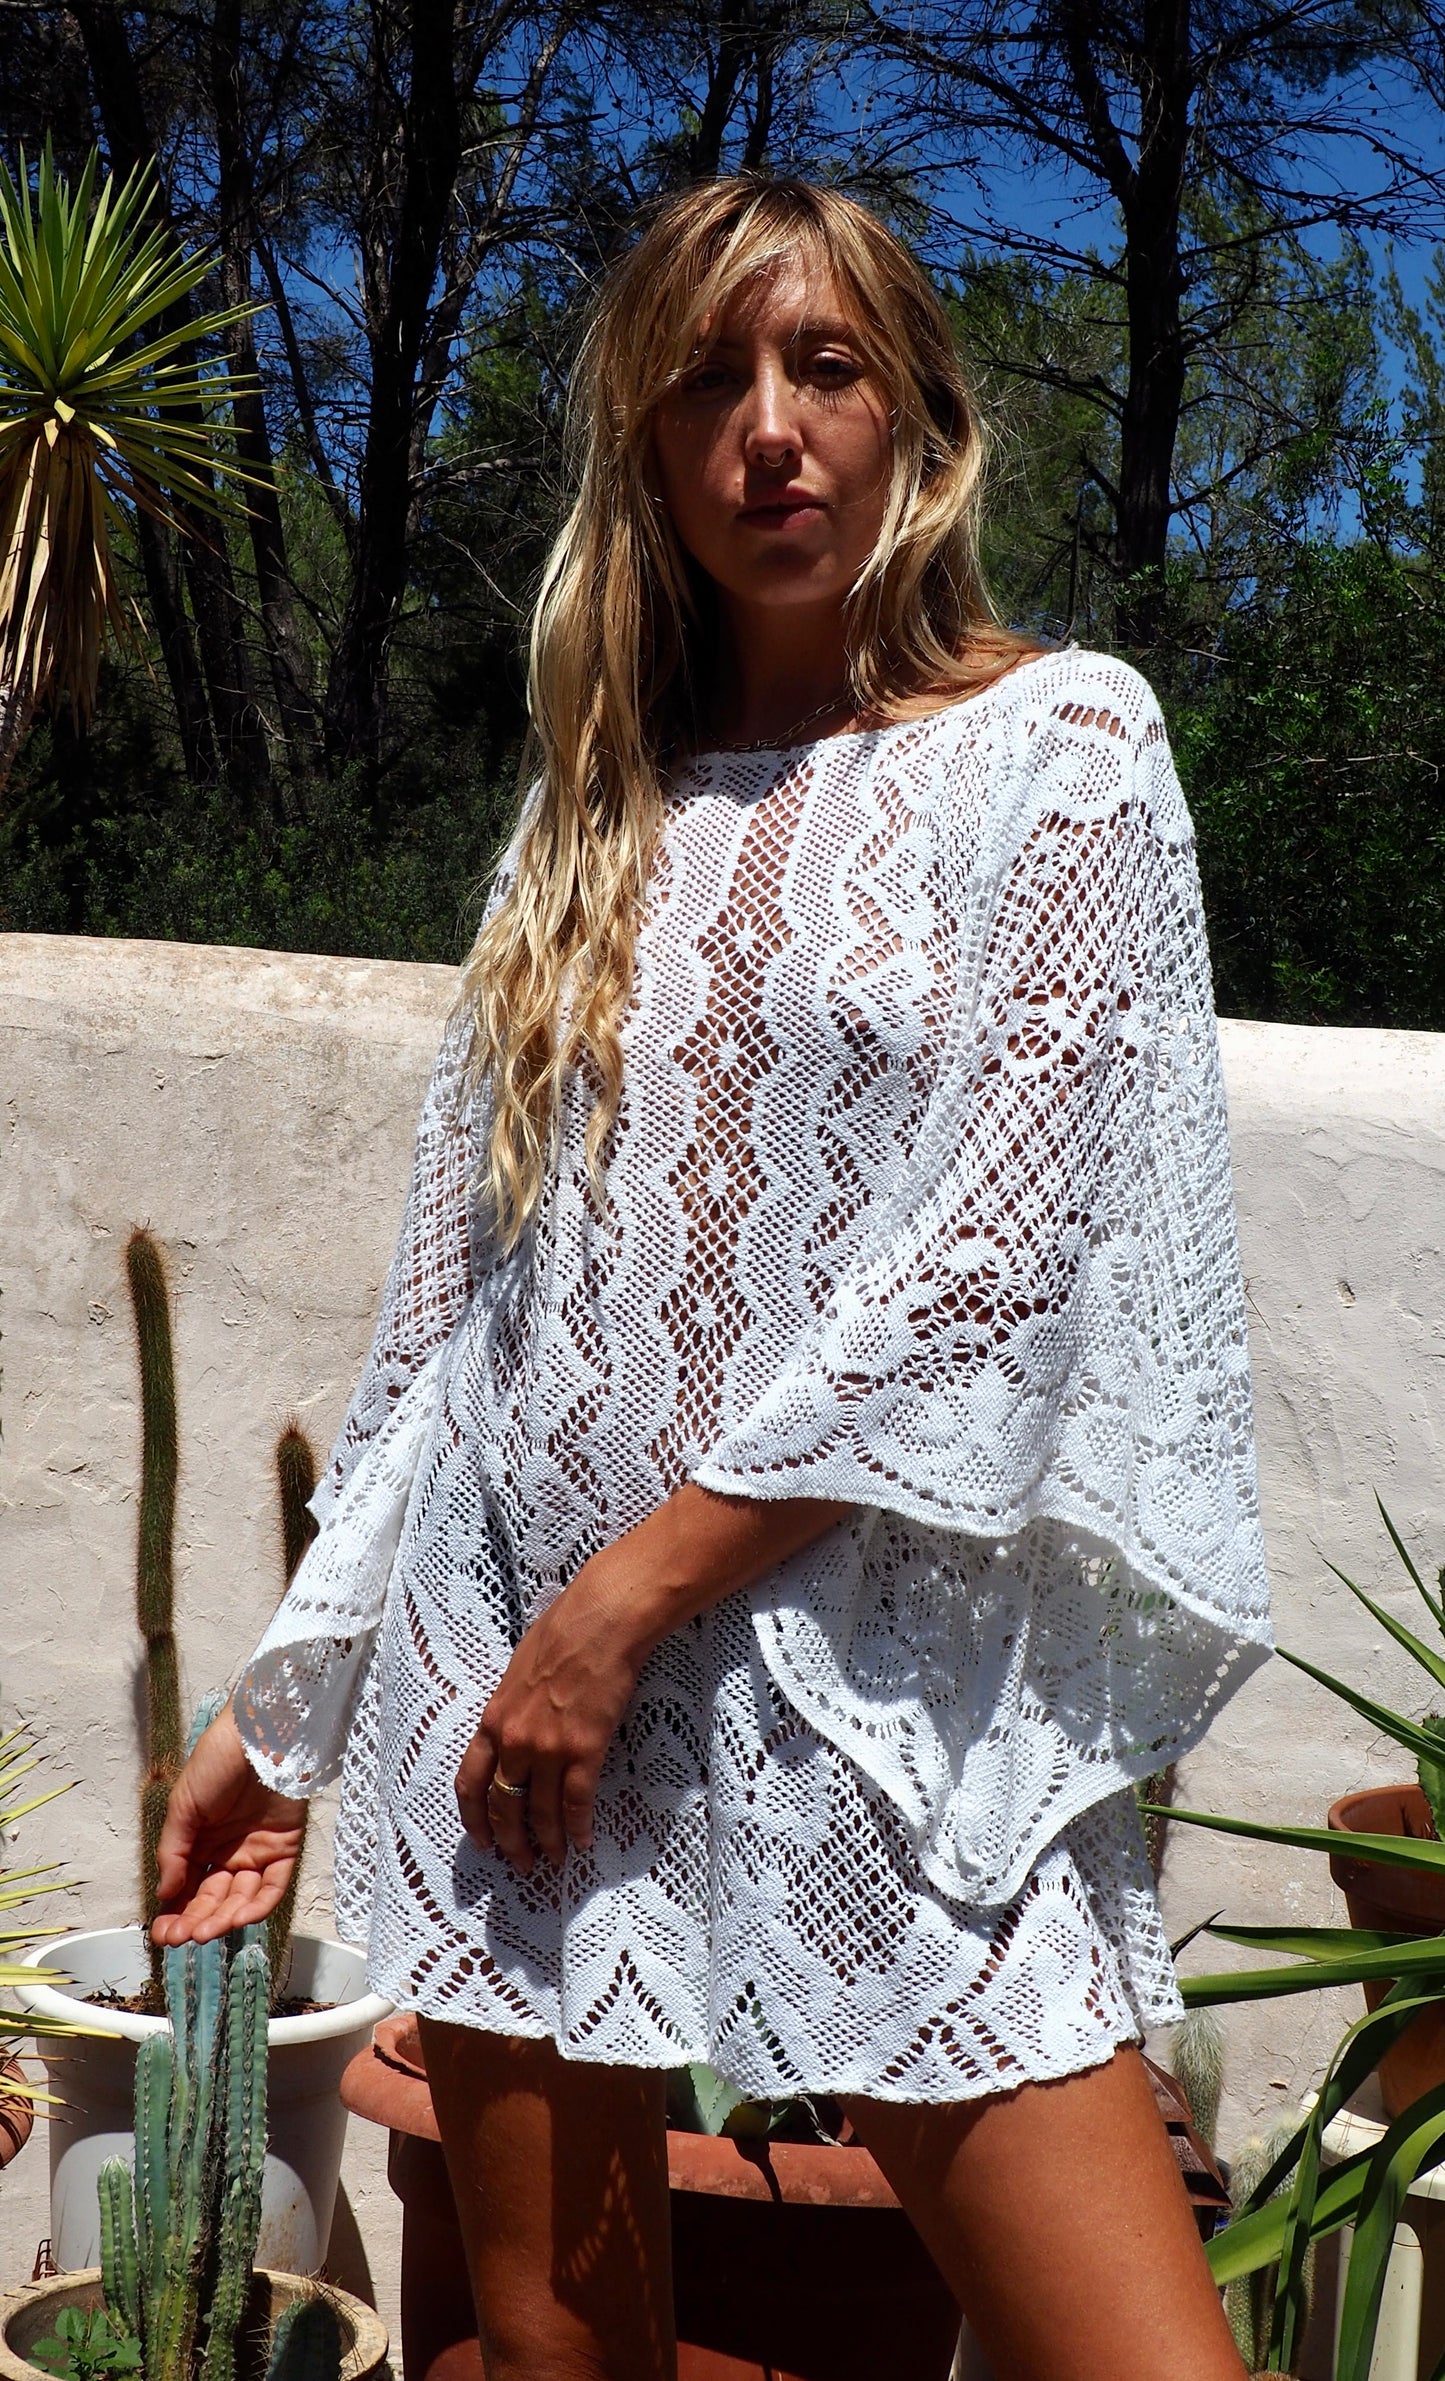 White vintage crochet bell sleeve shirt dress up-cycled by Vagabond Ibiza